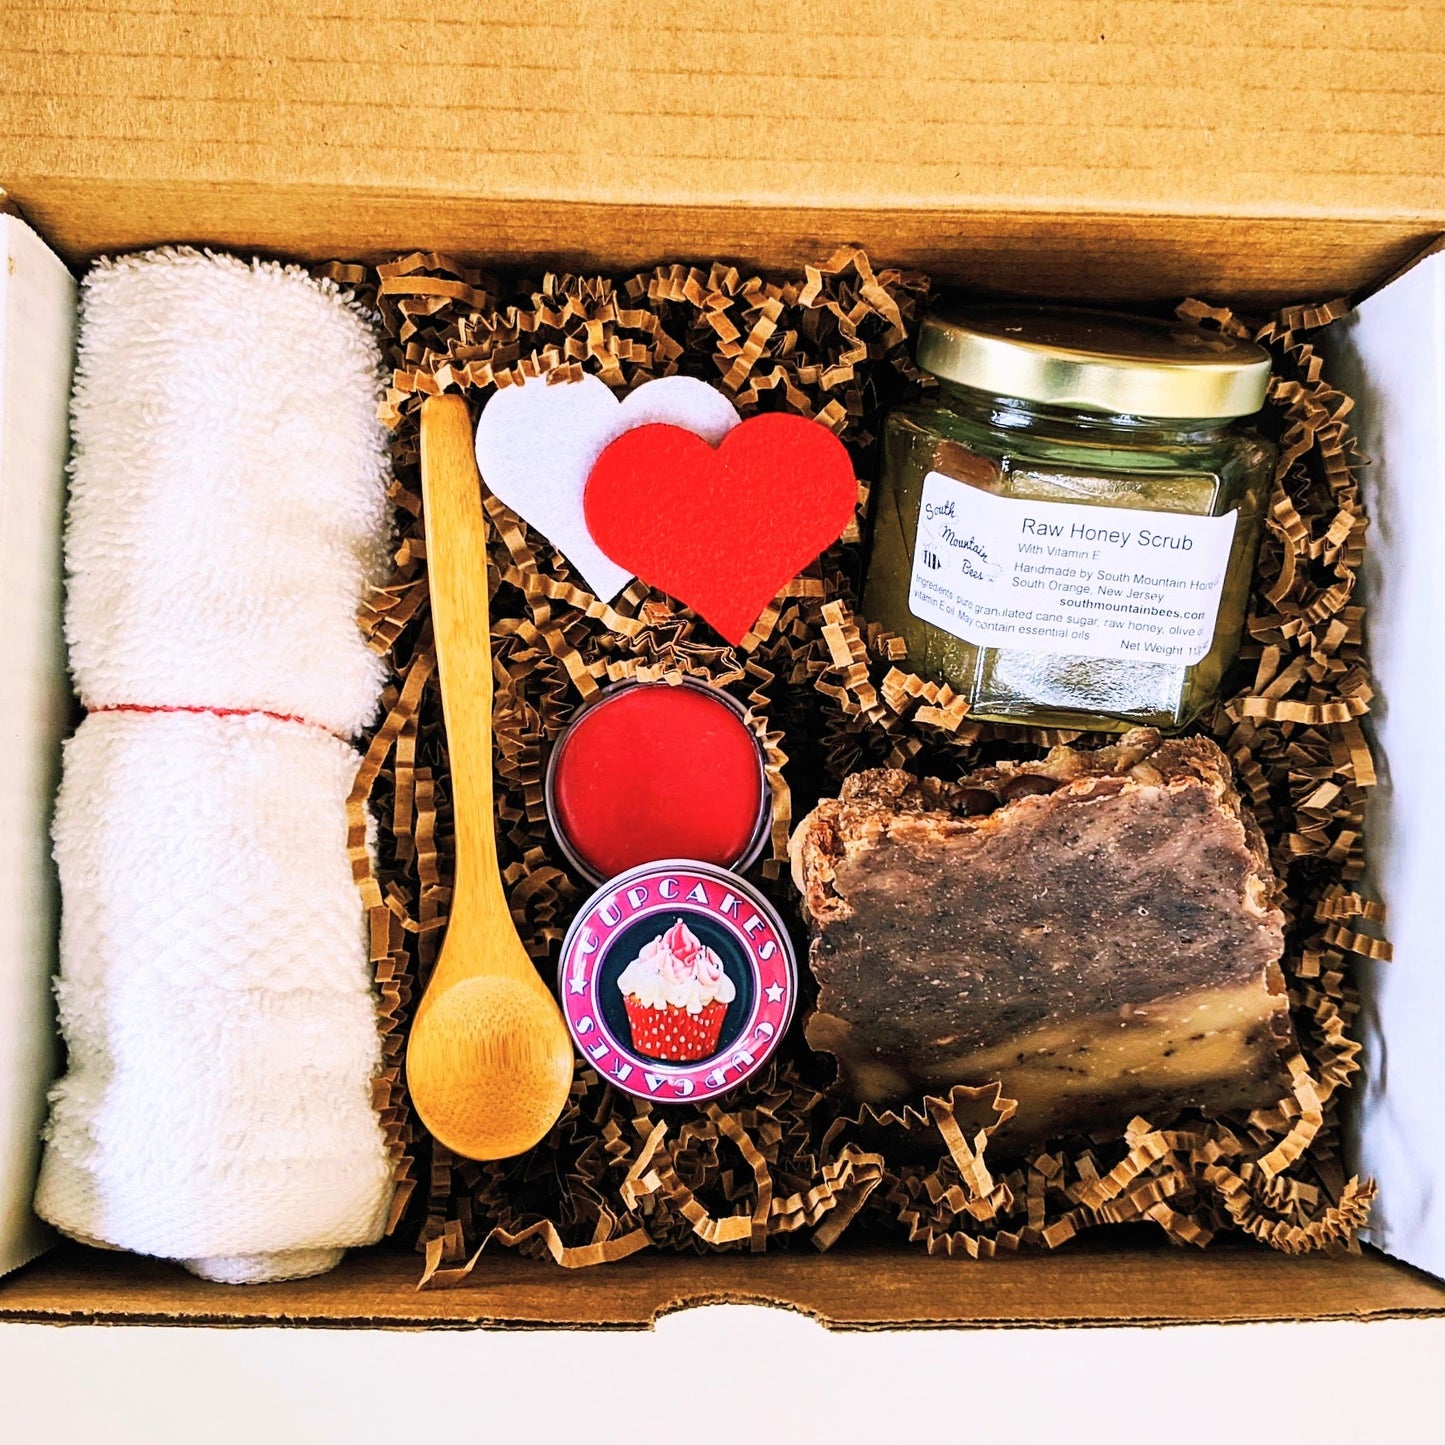 An assortment of natural products to pamper your self or  that special person. The box contains a raw honey scrub with a bamboo spoon, a cherry lip balm for the best kisses, and a honey soap for the best fragrance without the calories!